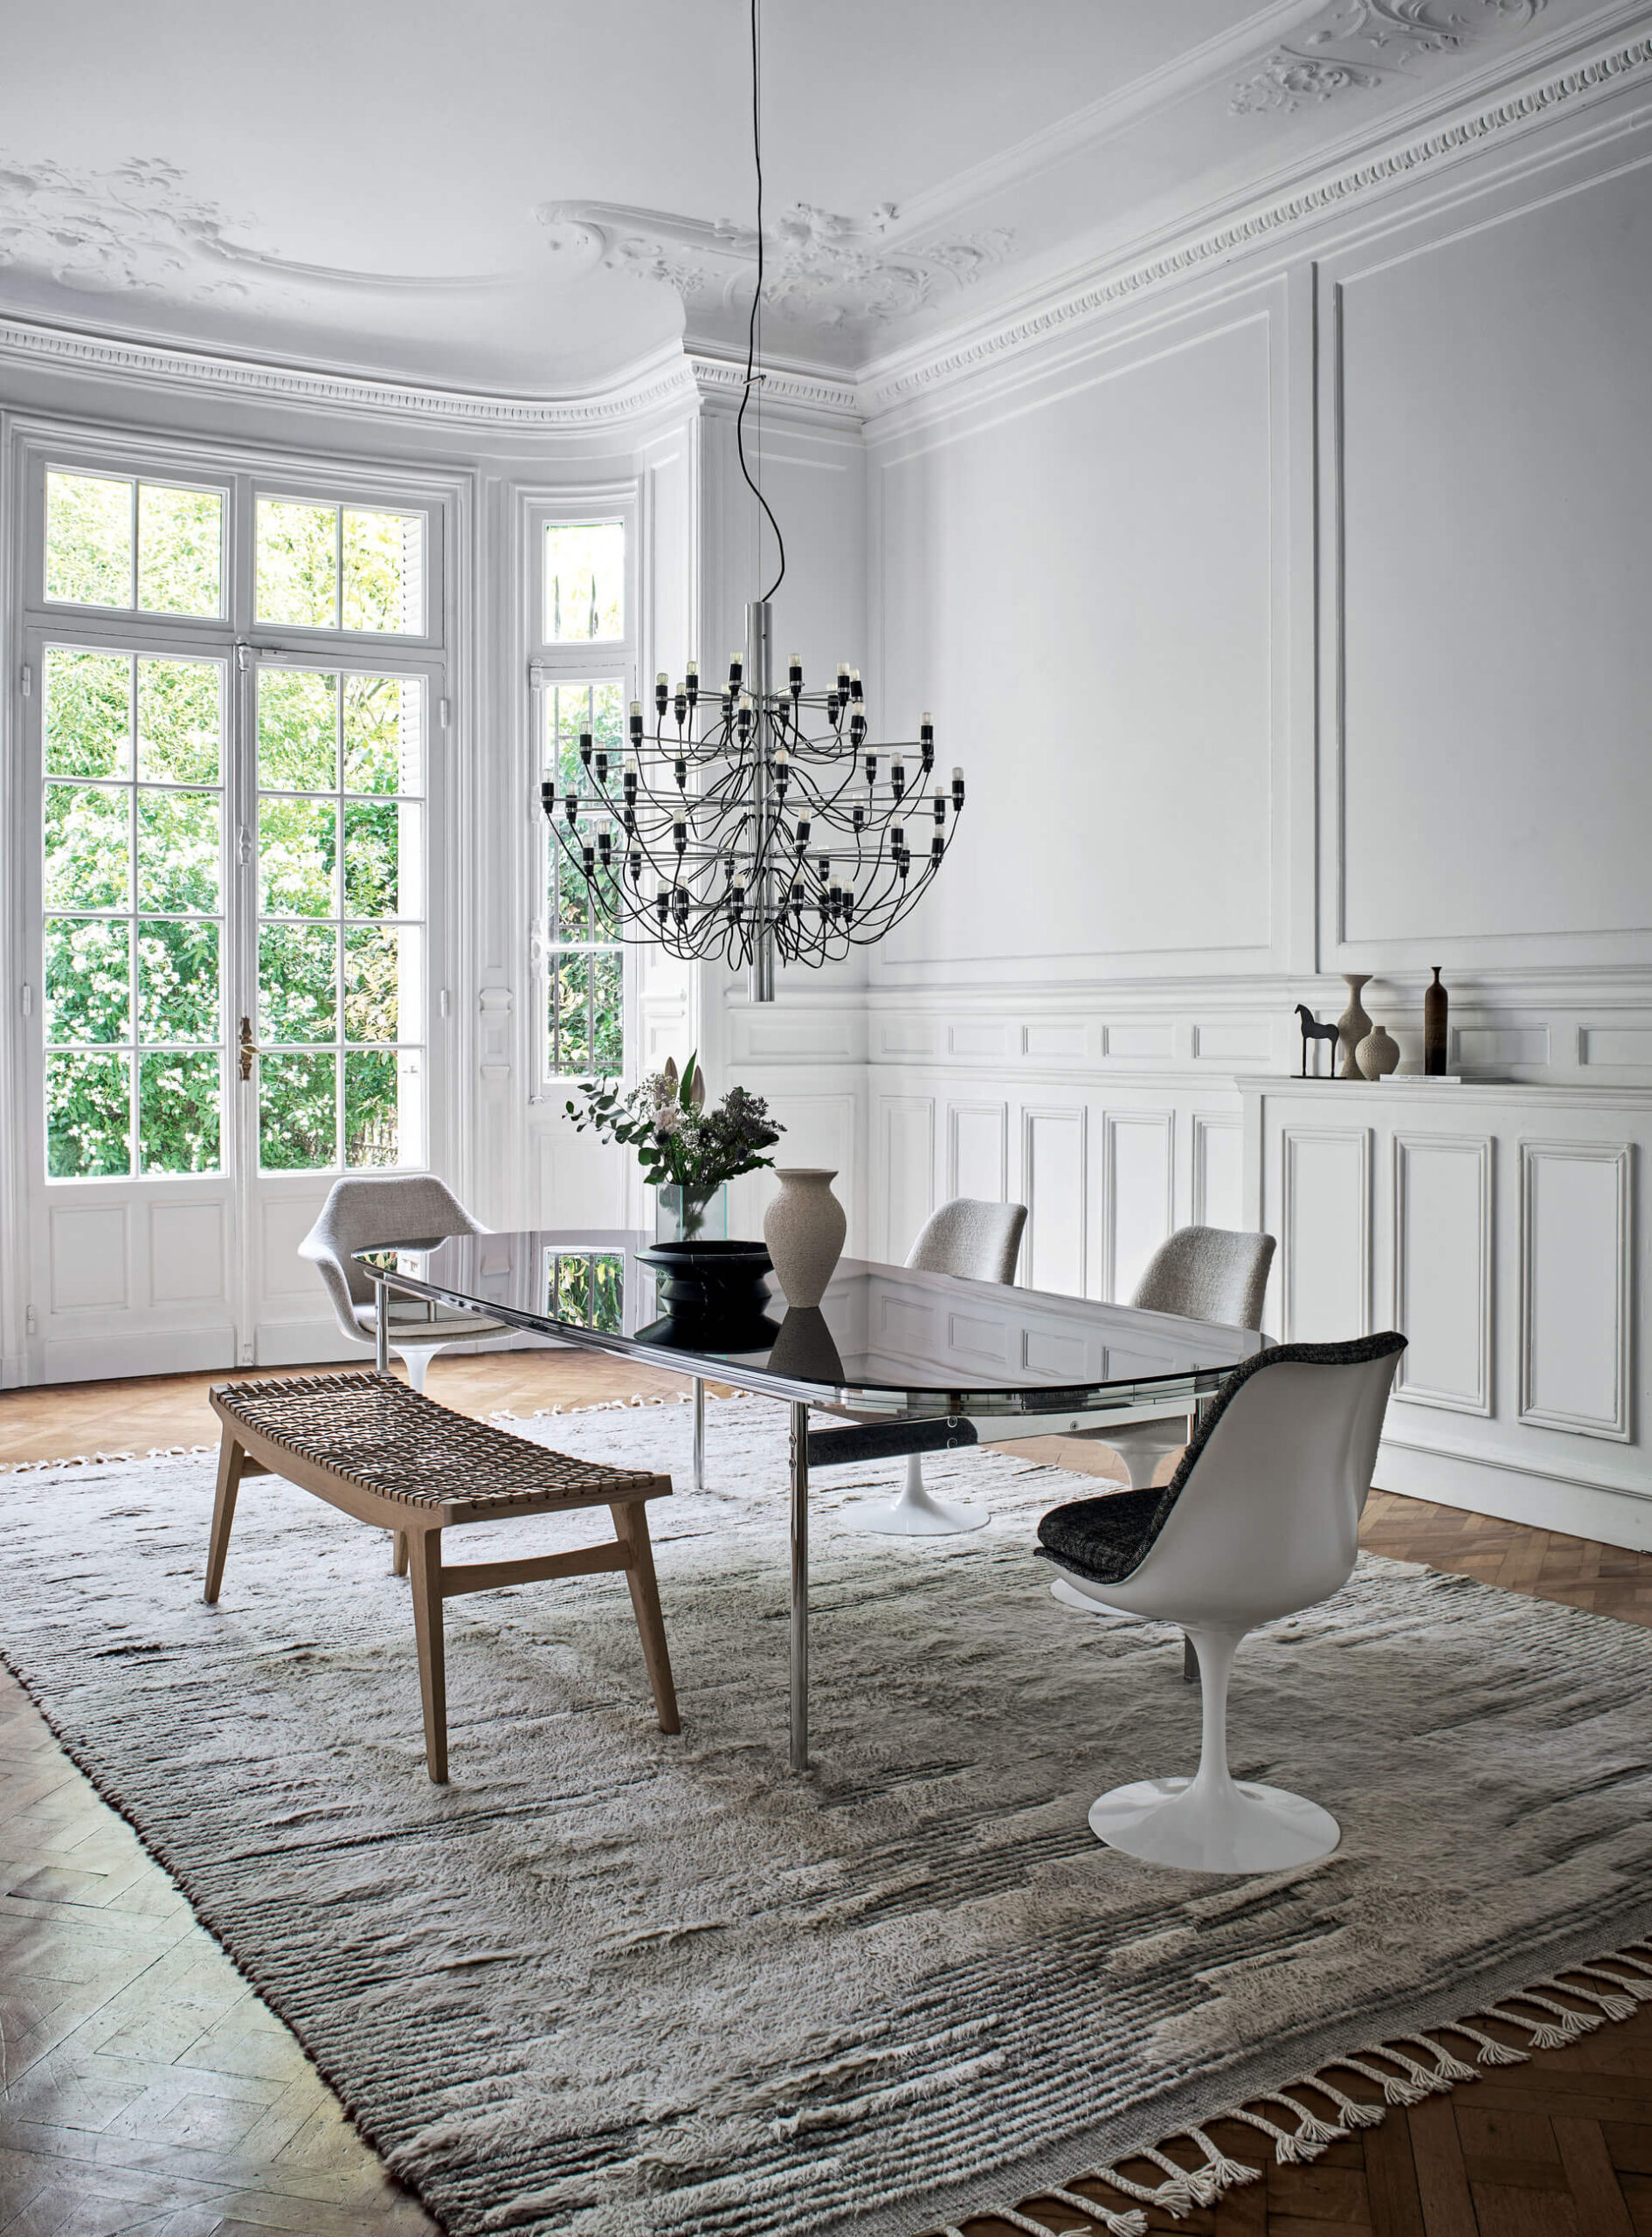 Knoll Citterio Table Collection